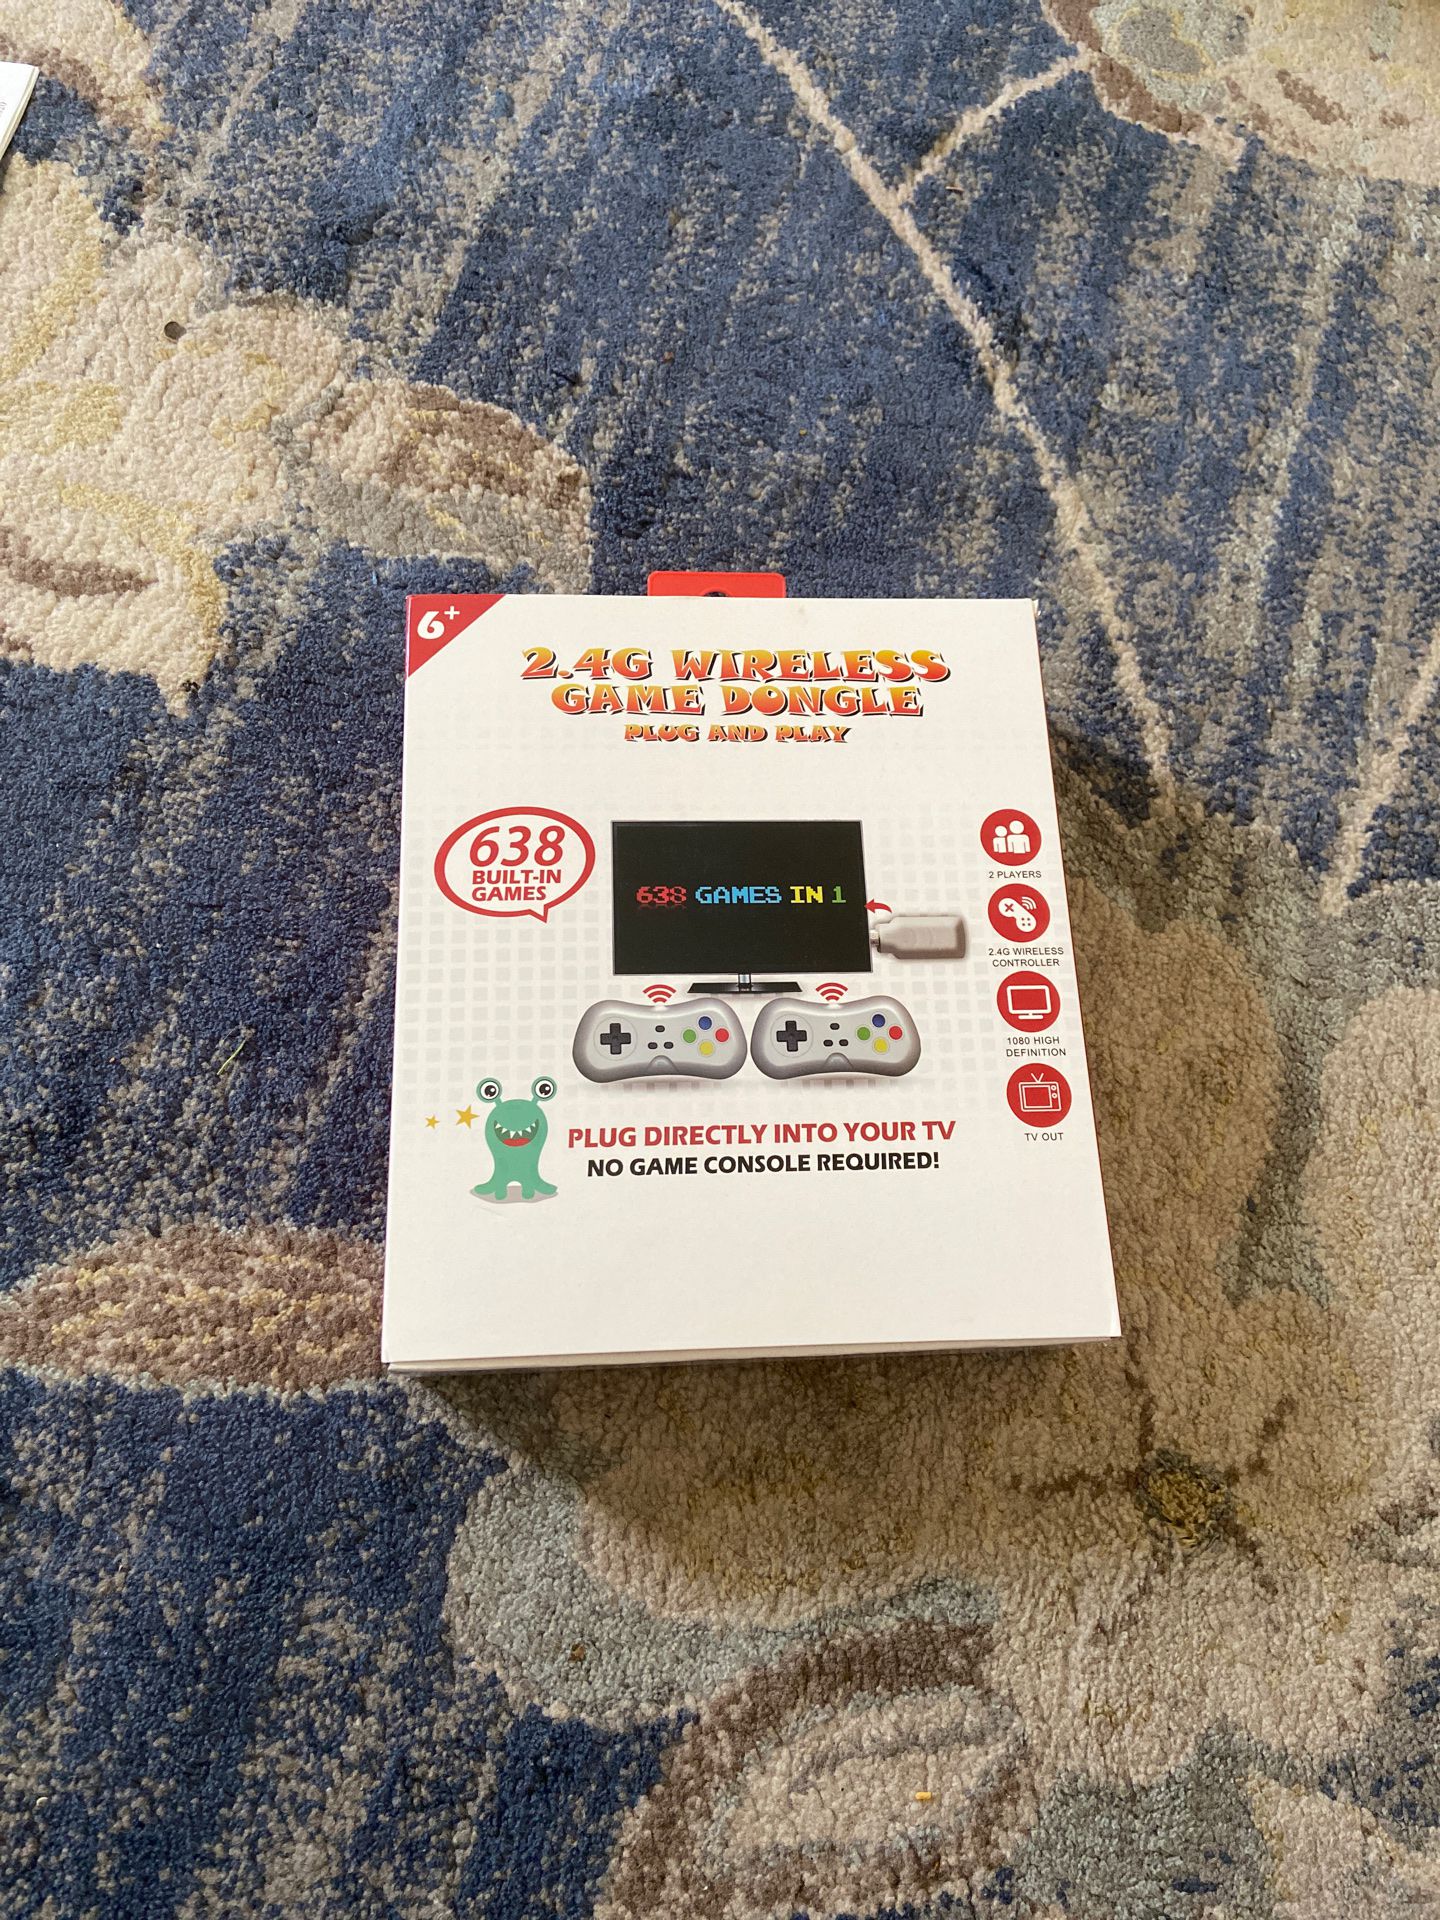 Game dongle for kids